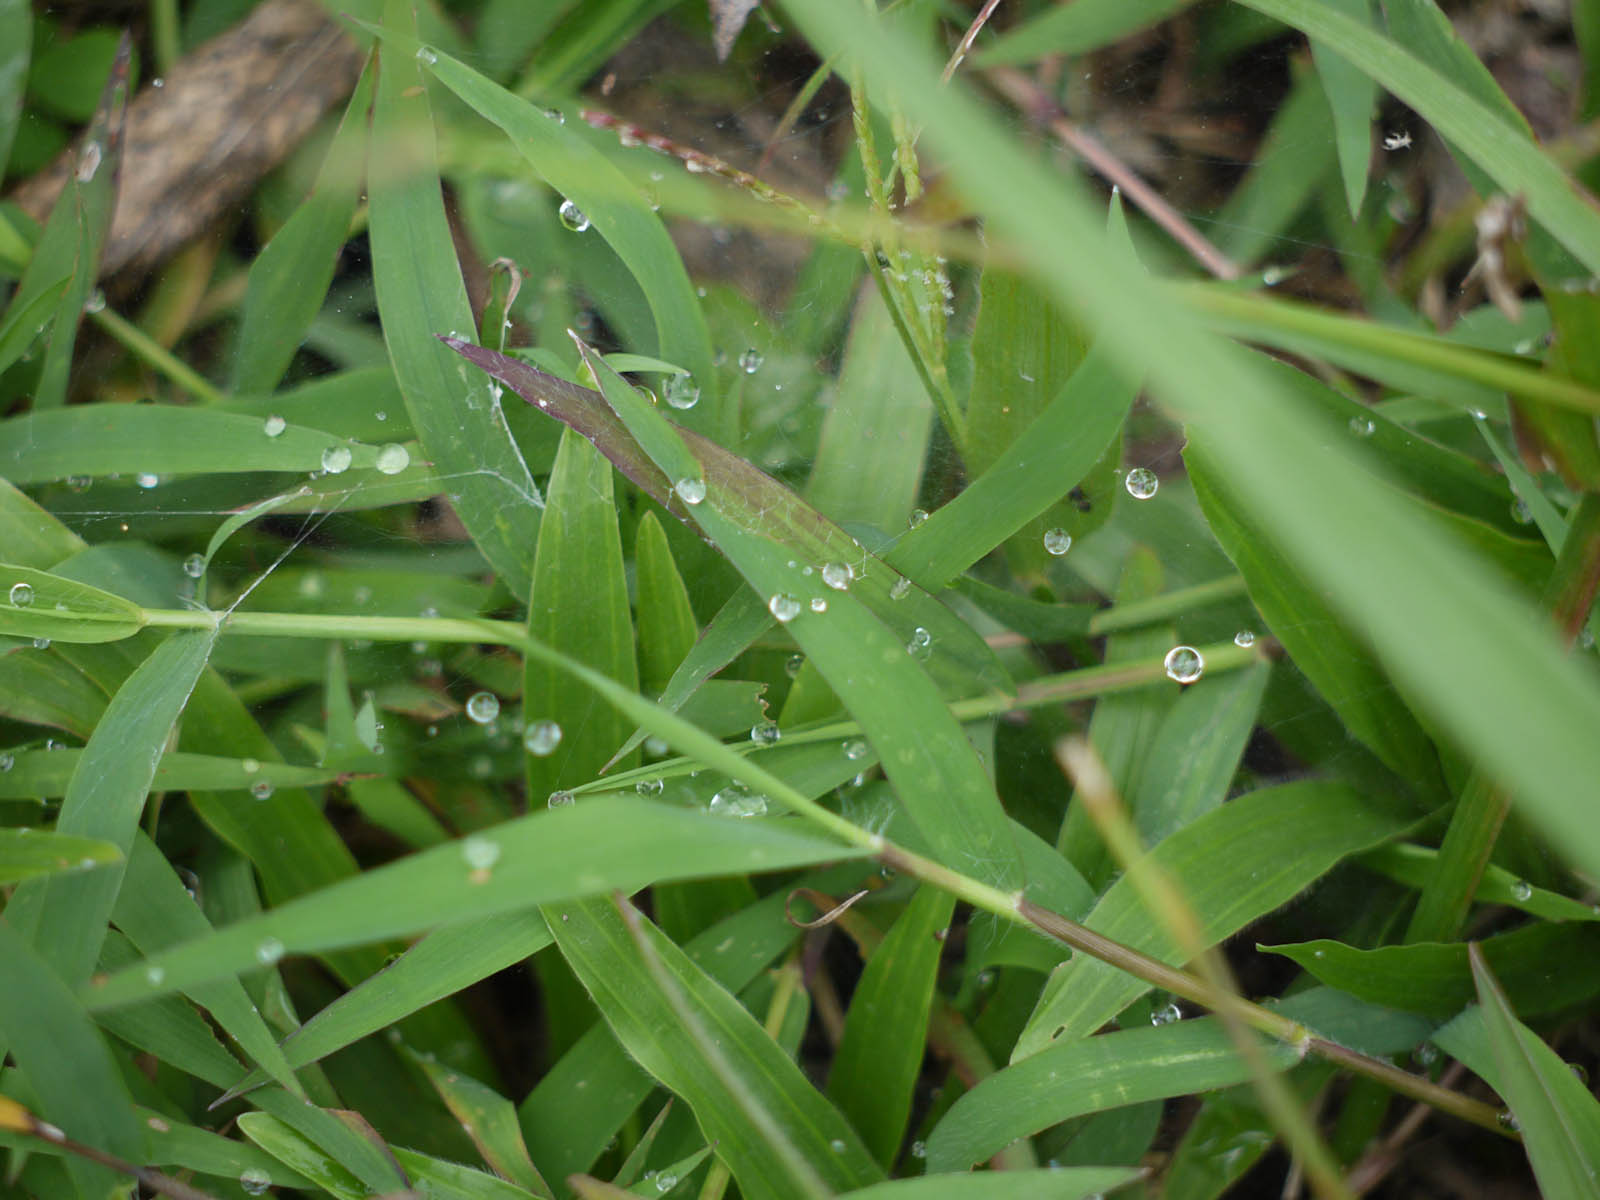 close up of drops of water on a grass